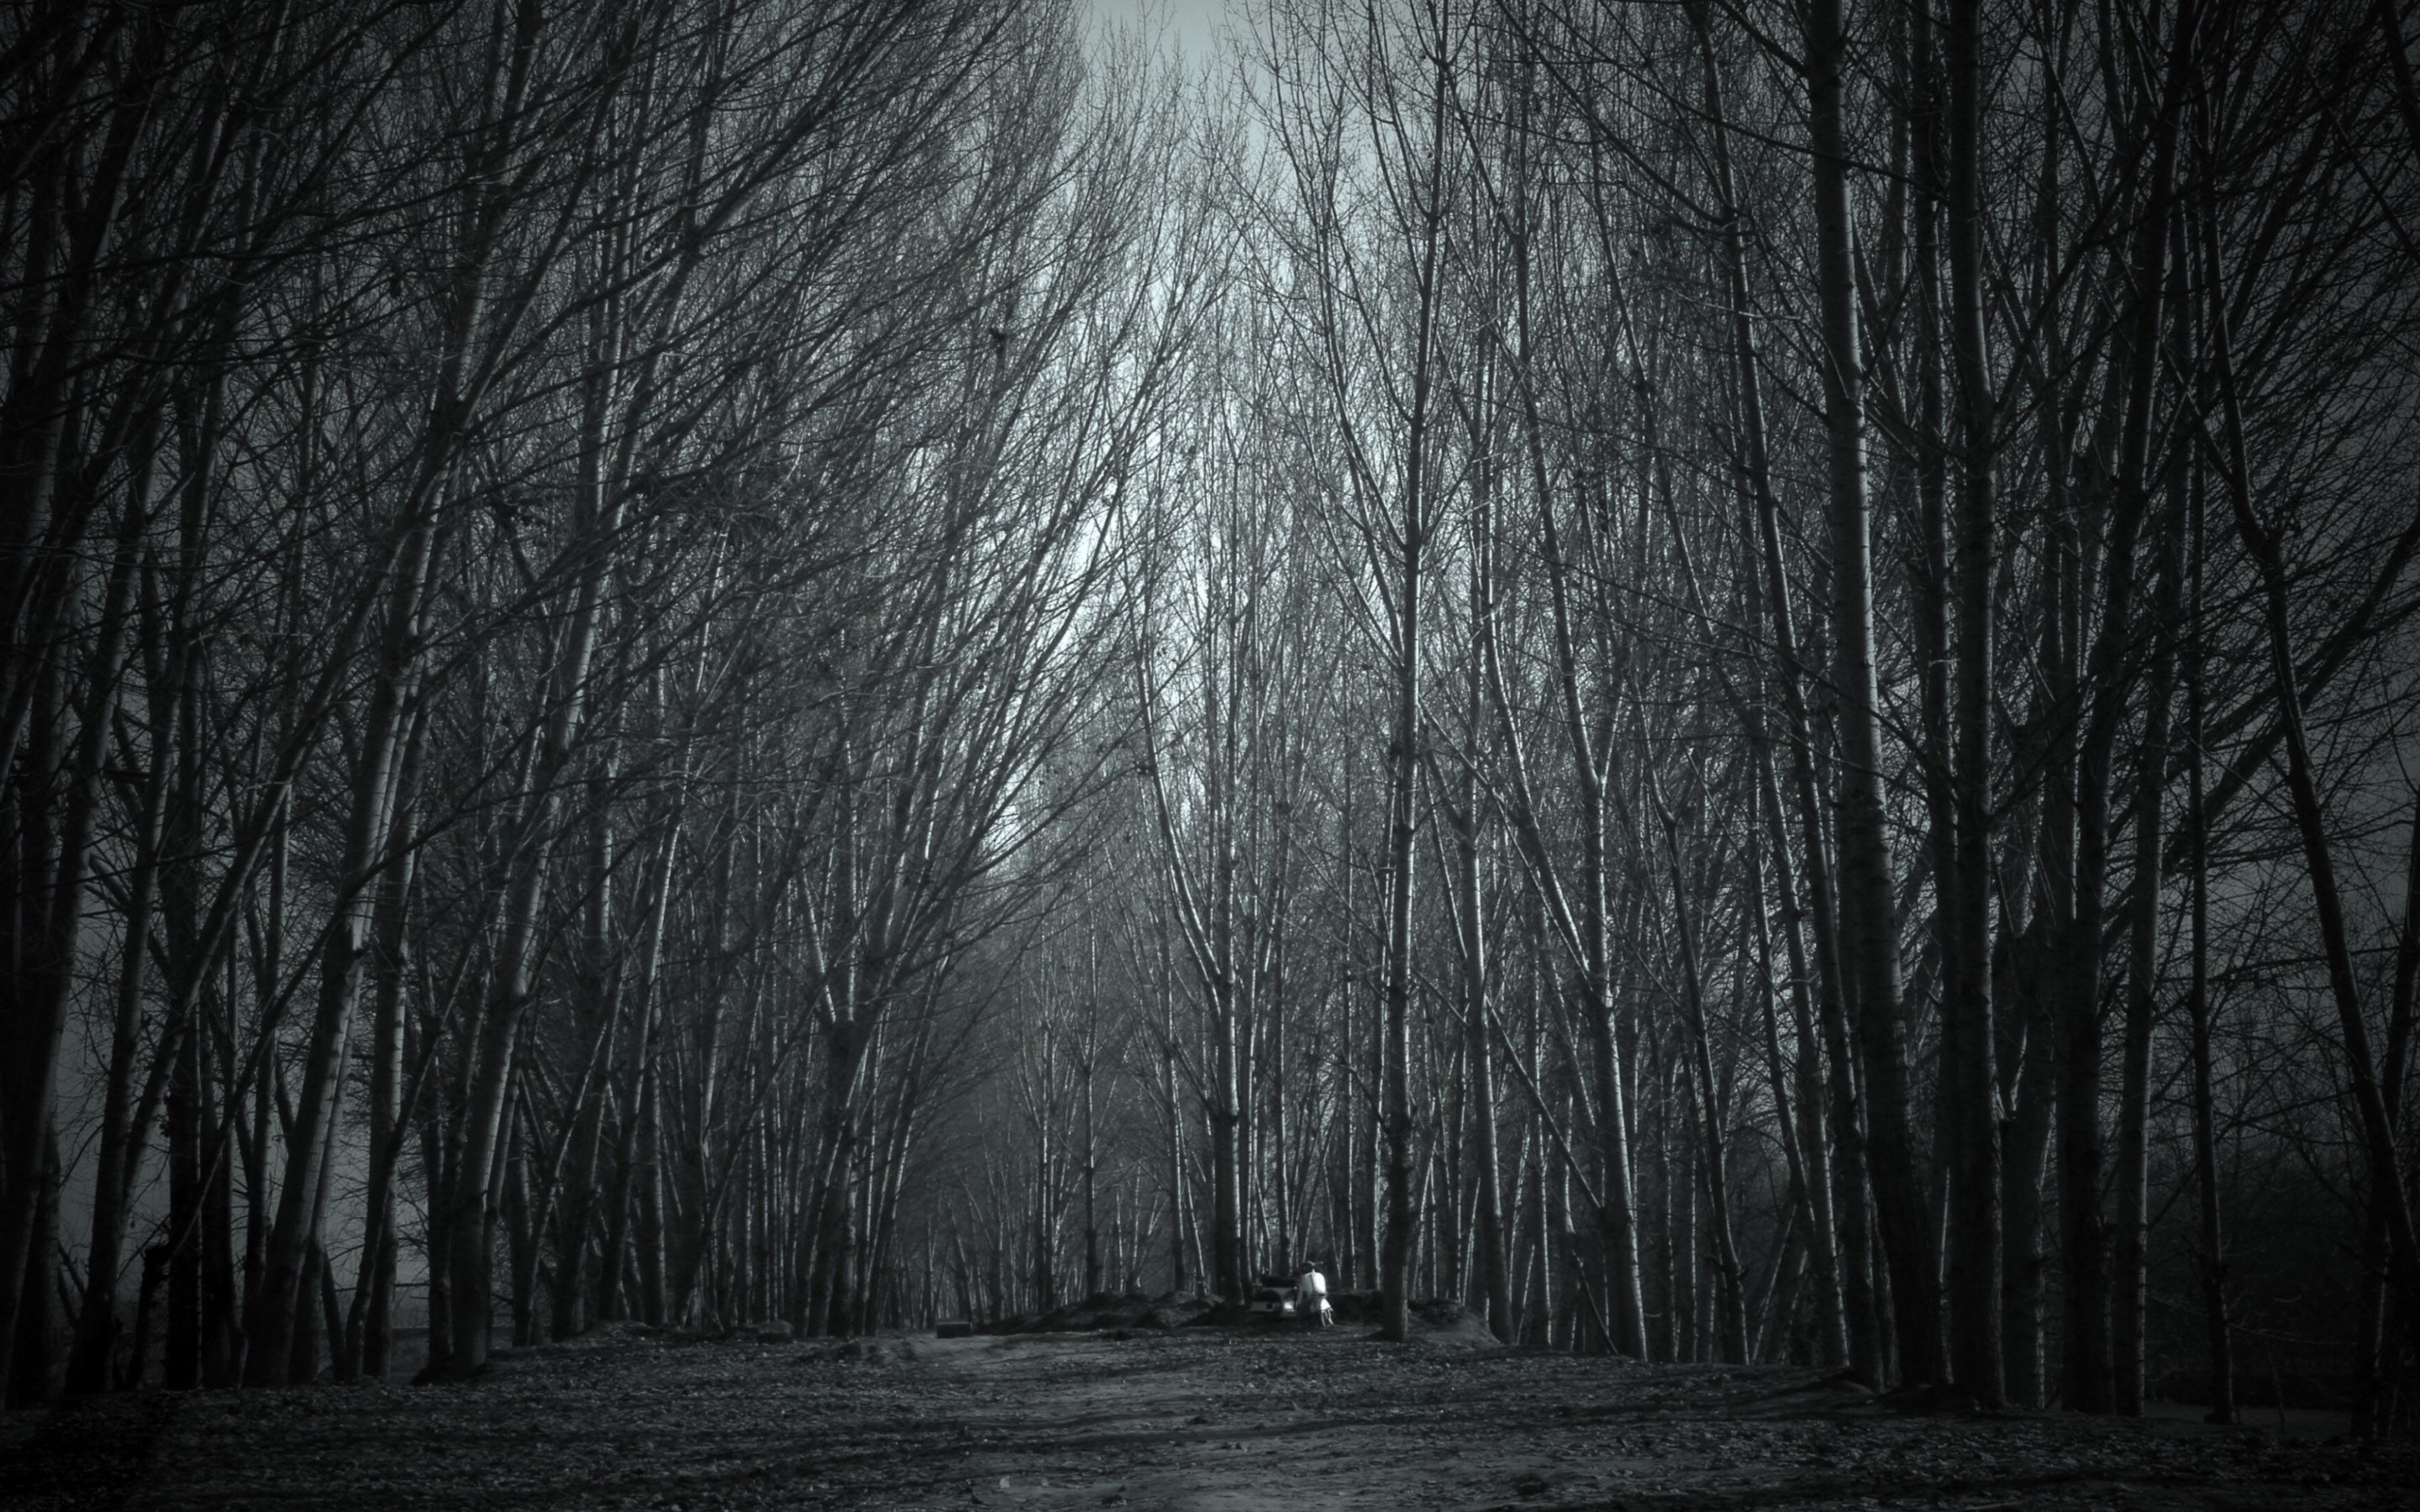 Haunted Forest wallpaper. Forest wallpaper, Haunted forest